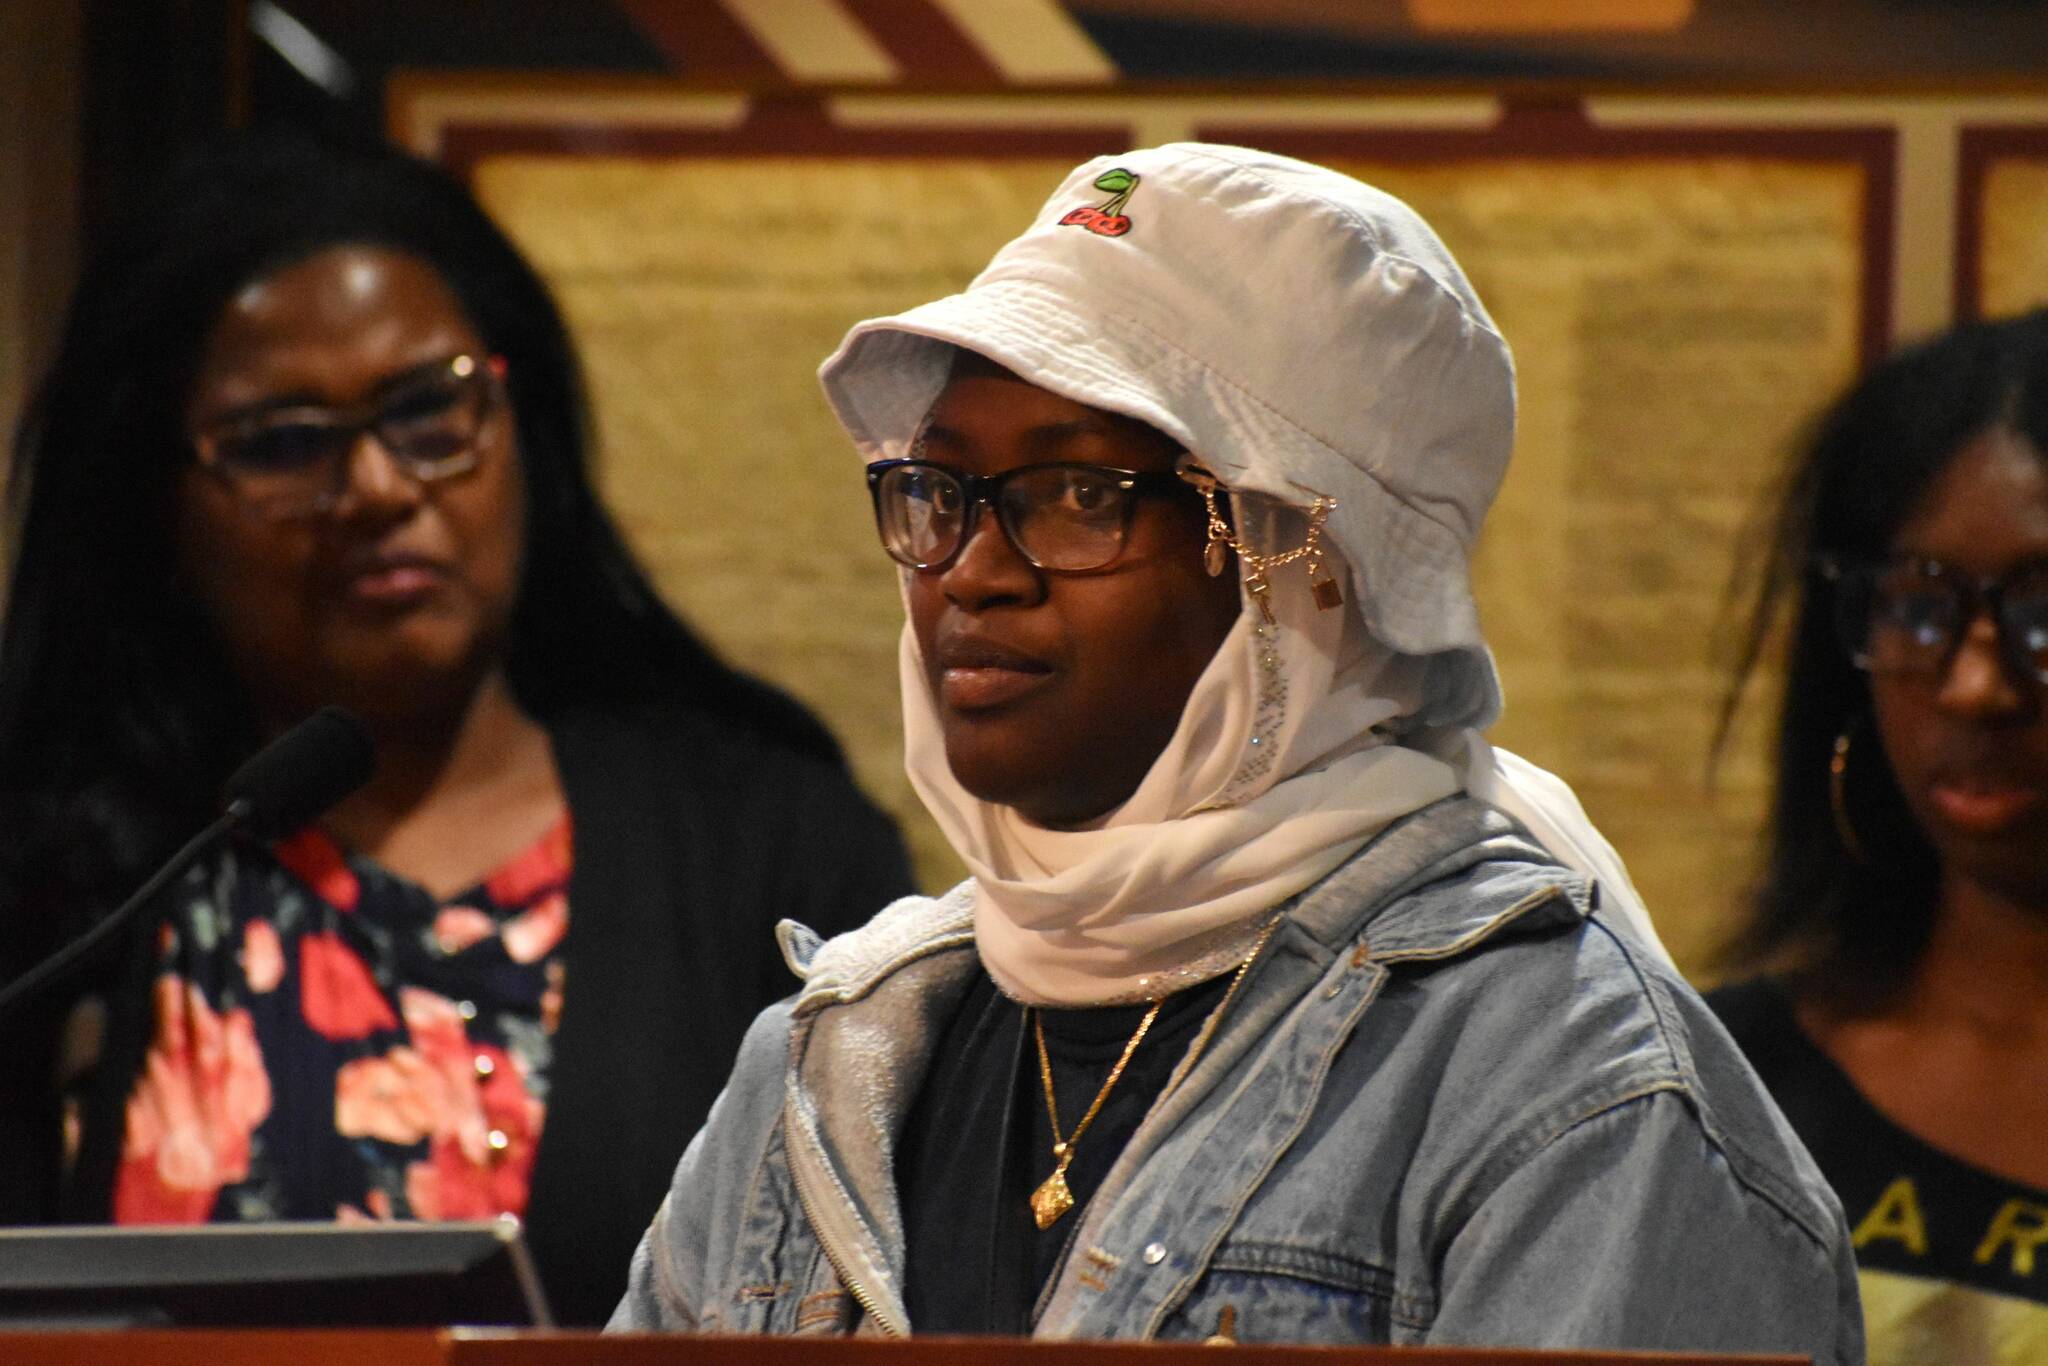 A local student shares details of the plans for Thomas Jefferson High School’s Black History Month, to include include historic black movies and educational presentations. Alex Bruell / The Mirror